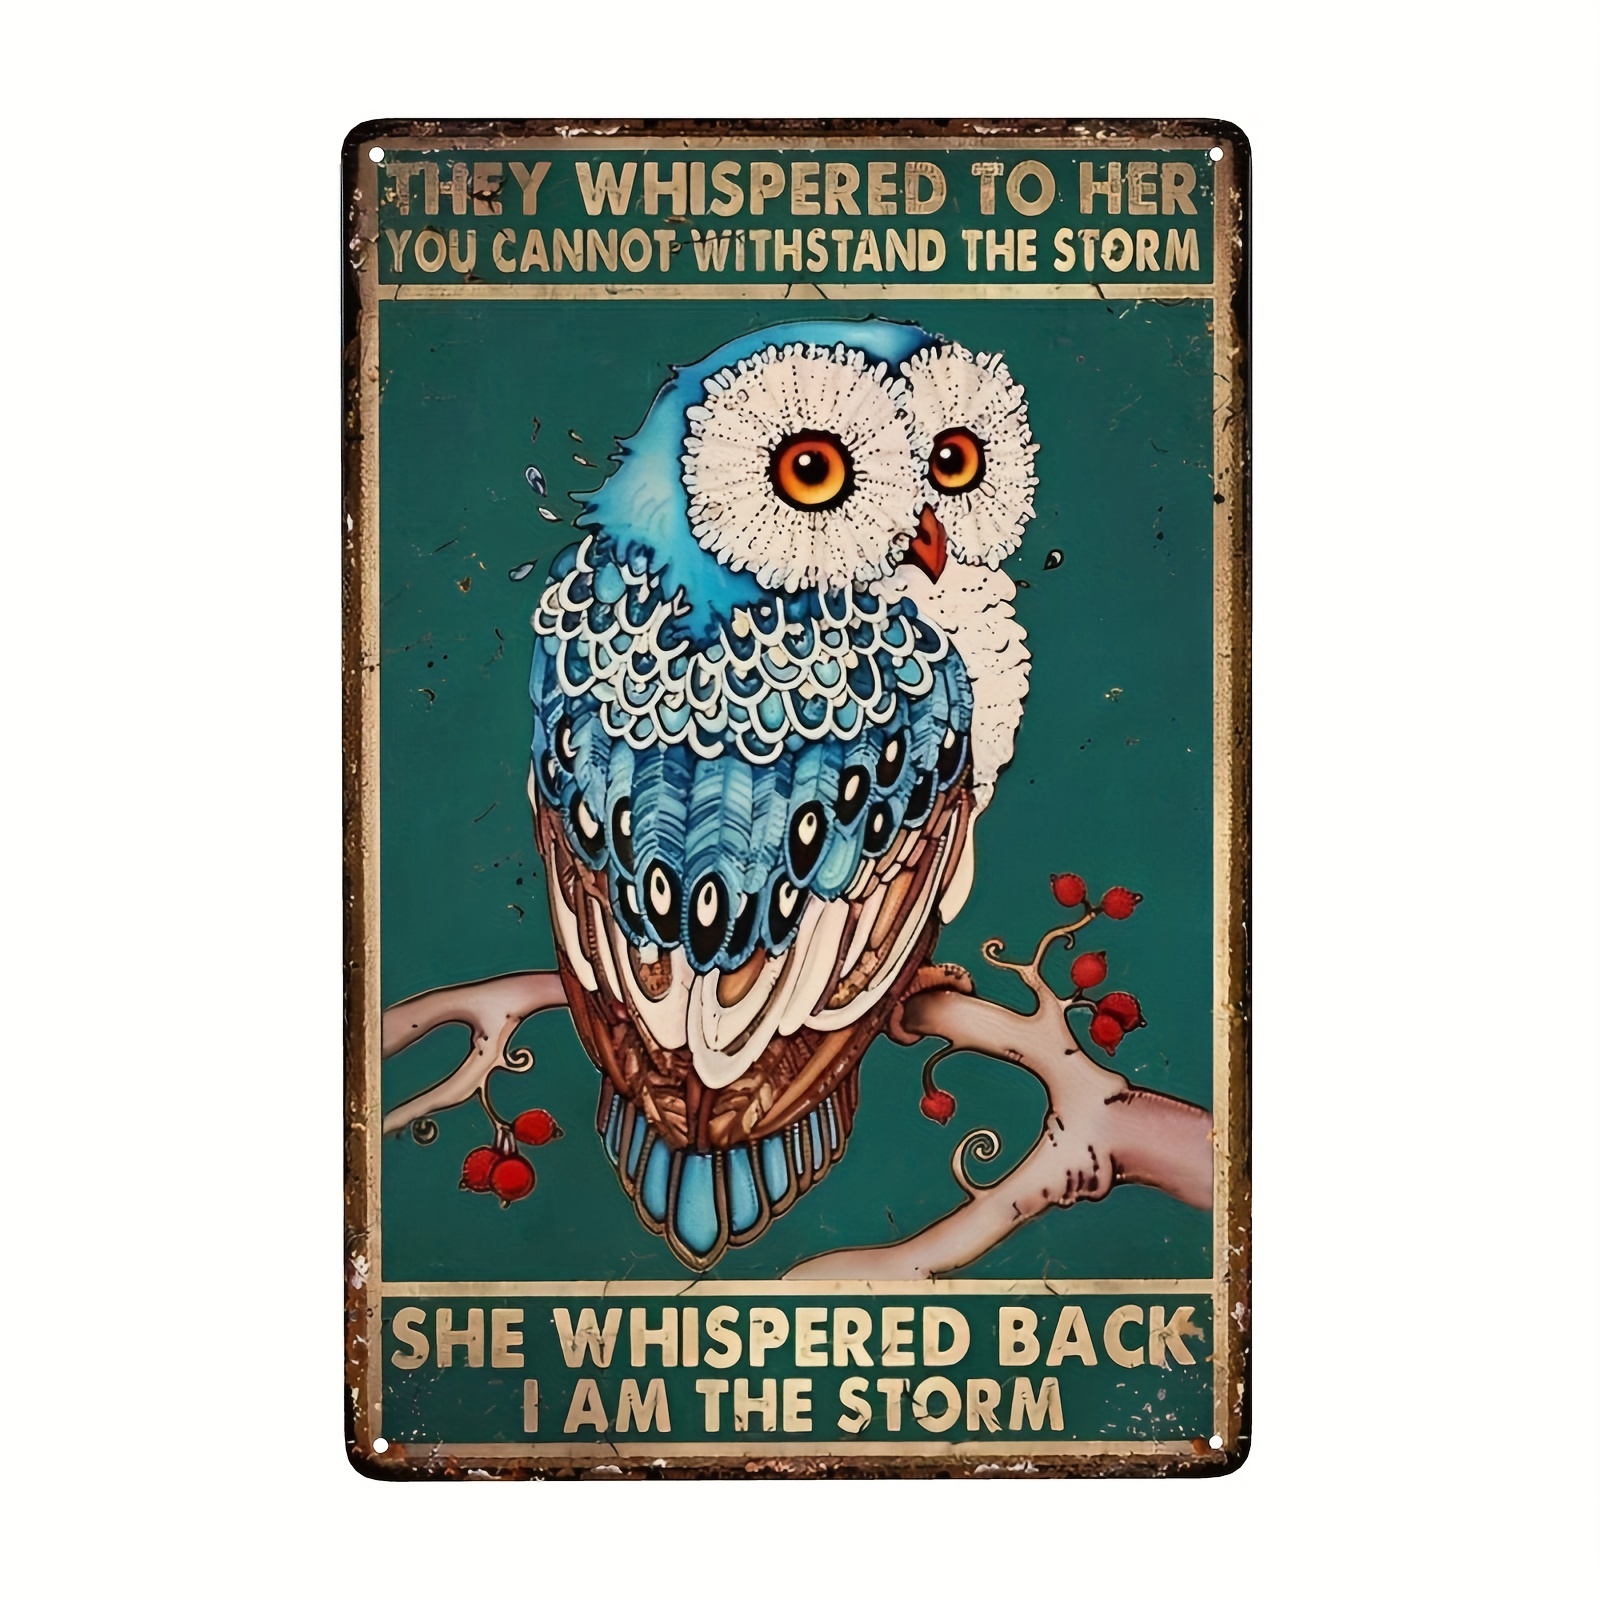  Wanted Owl Lady 8X12 Inch Metal Retro Look Decoration Poster  Sign for Home Kitchen Garden Garage Bar Pub Club Funny Wall Decor : Home &  Kitchen